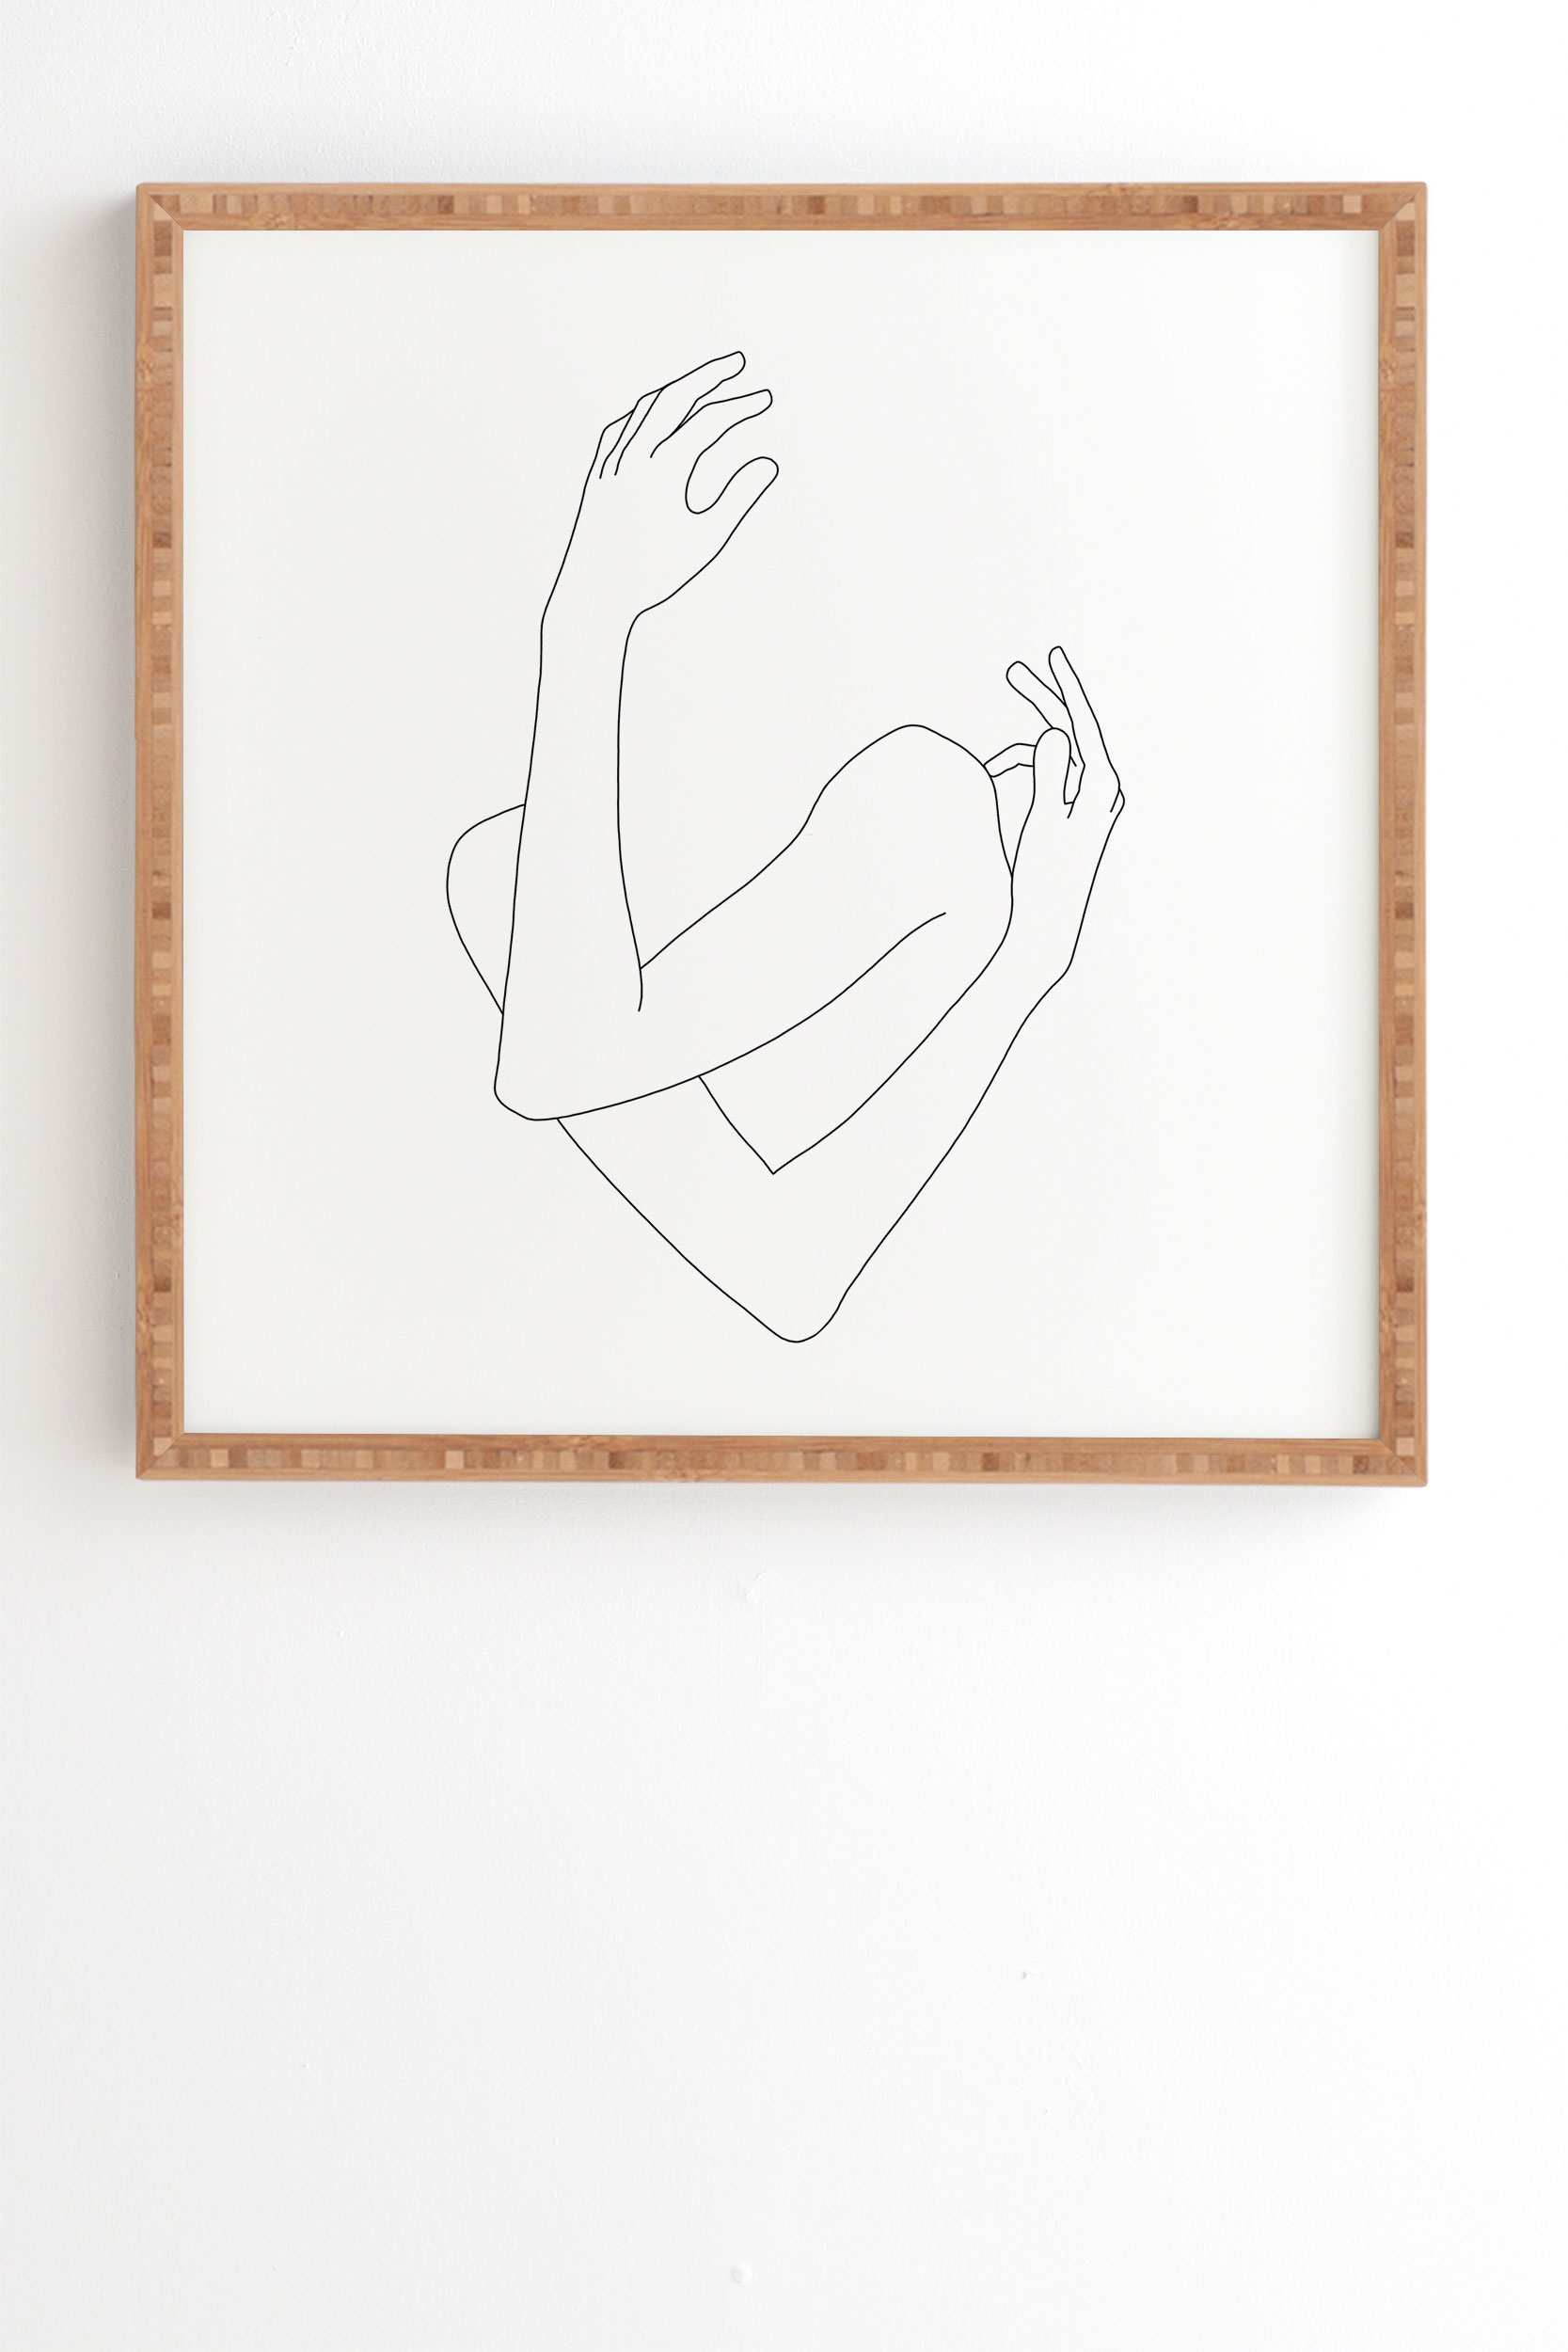 Crossed Arms Illustration Jill by The Colour Study - Framed Wall Art Bamboo 19" x 22.4" - Image 1